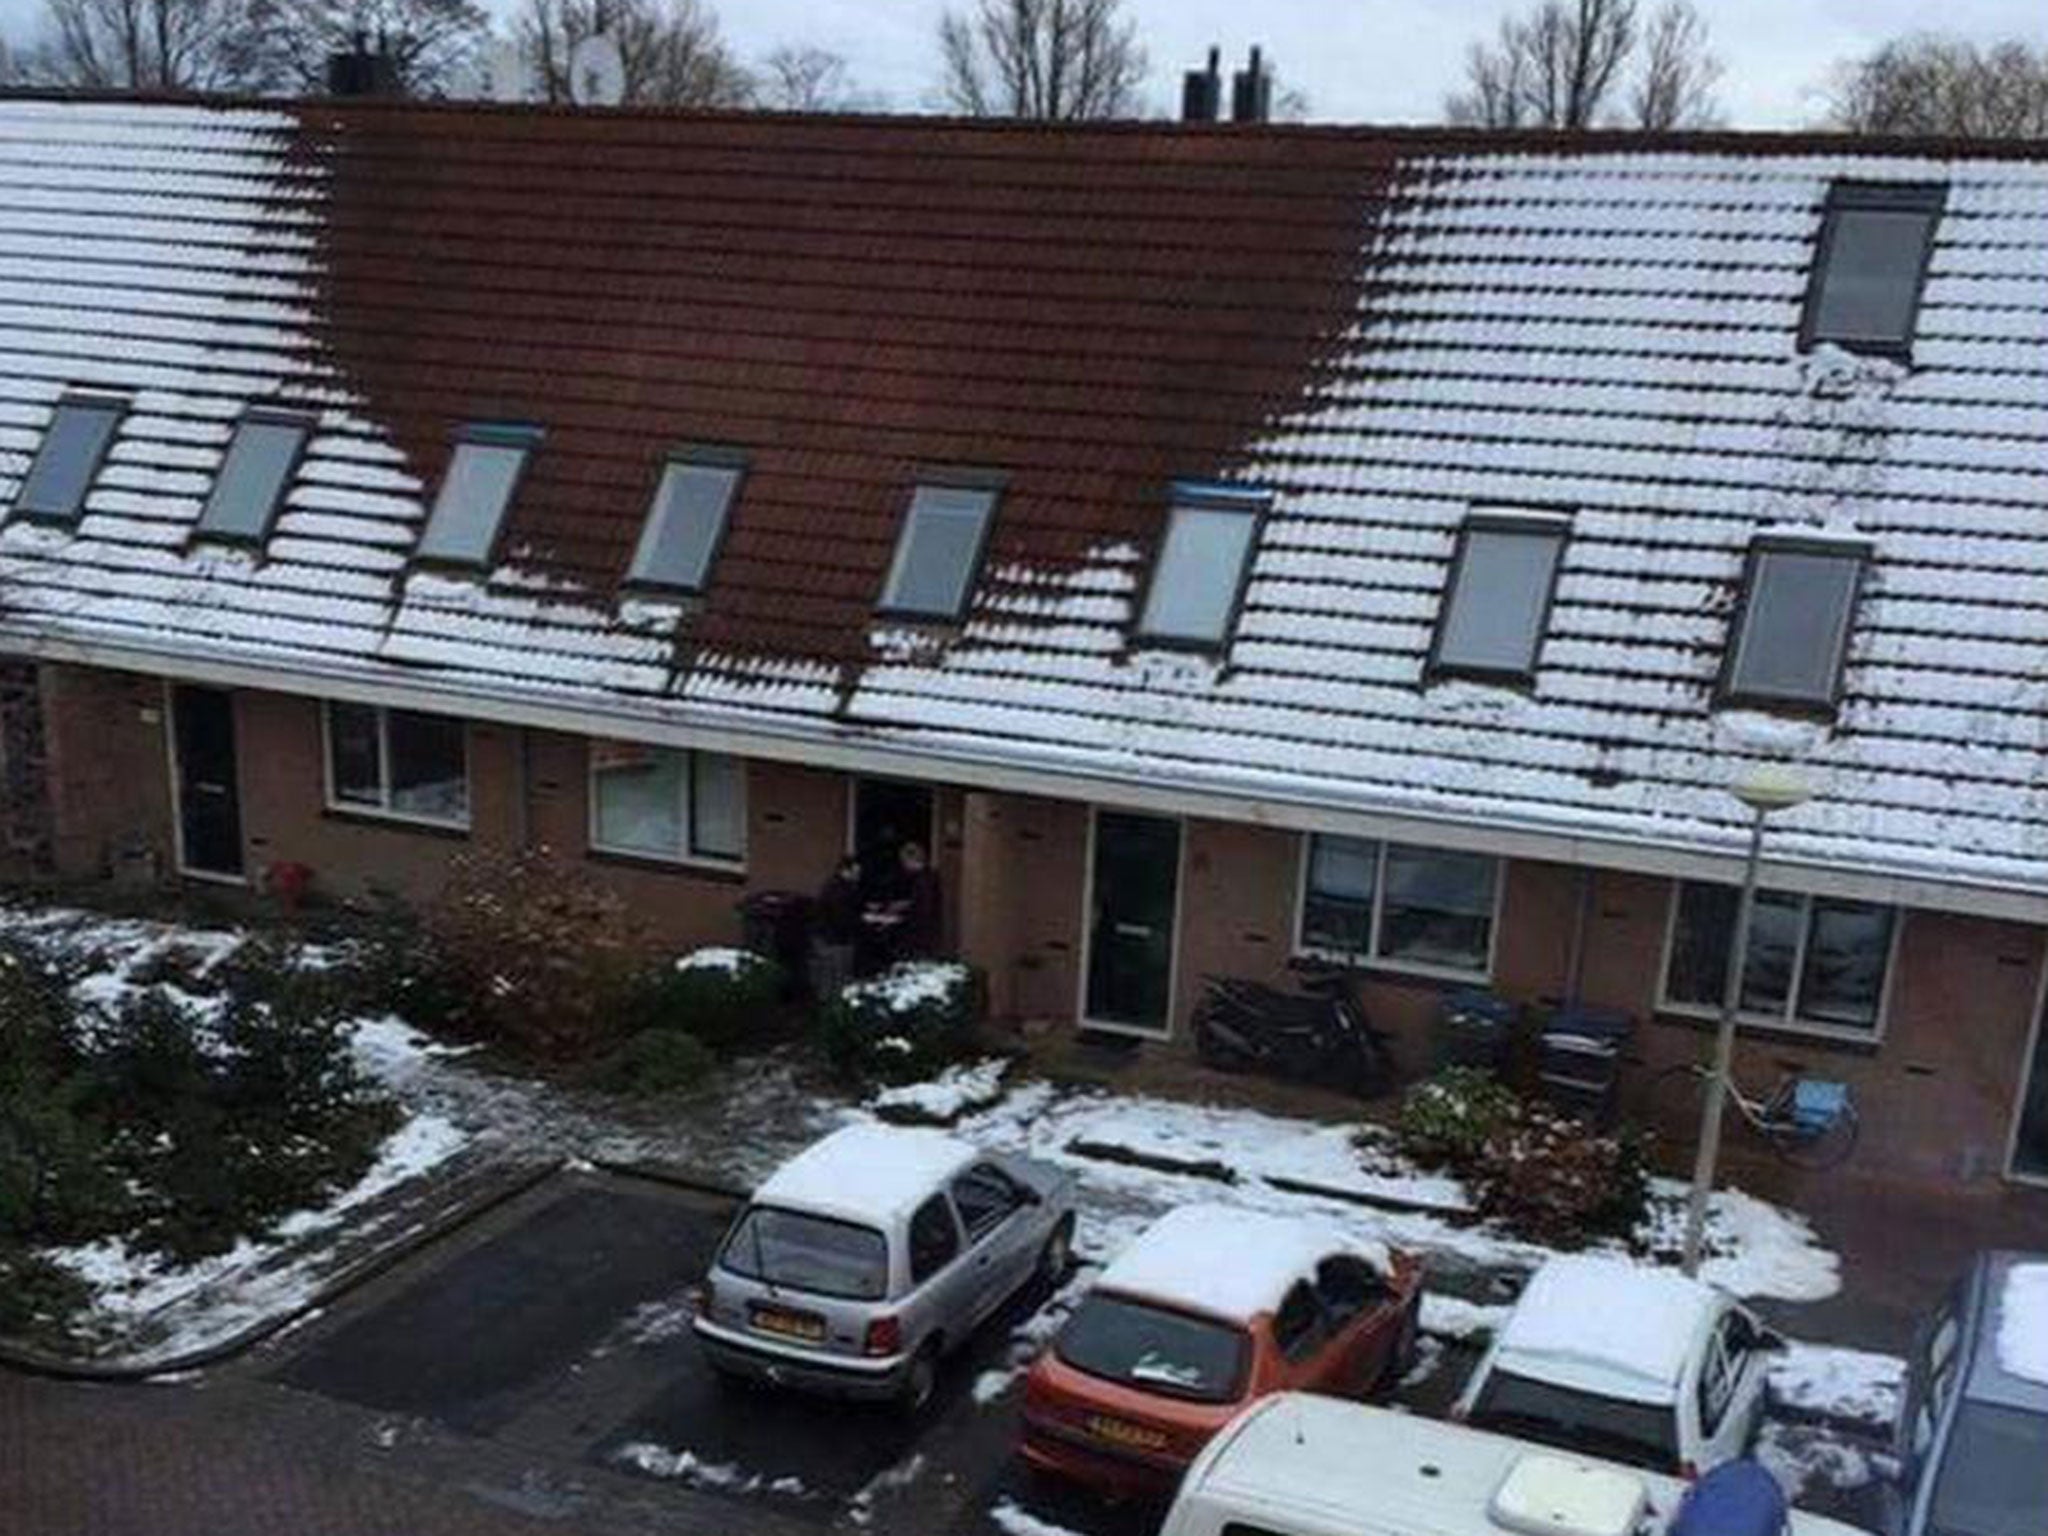 A snow-free cannabis farm found in , the Netherlands